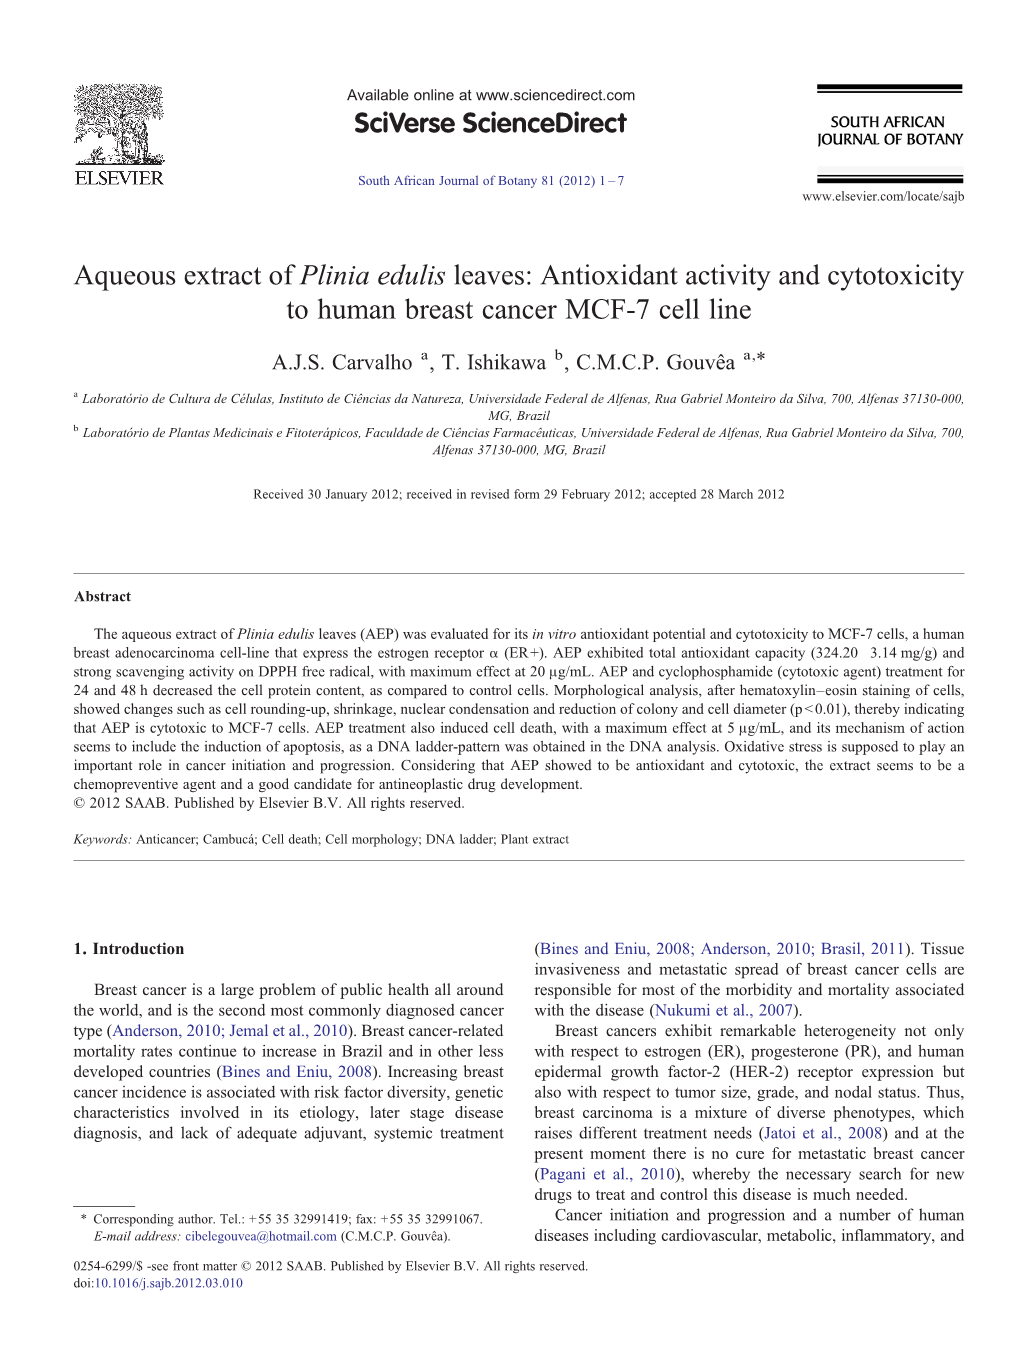 Aqueous Extract of Plinia Edulis Leaves: Antioxidant Activity and Cytotoxicity to Human Breast Cancer MCF-7 Cell Line ⁎ A.J.S